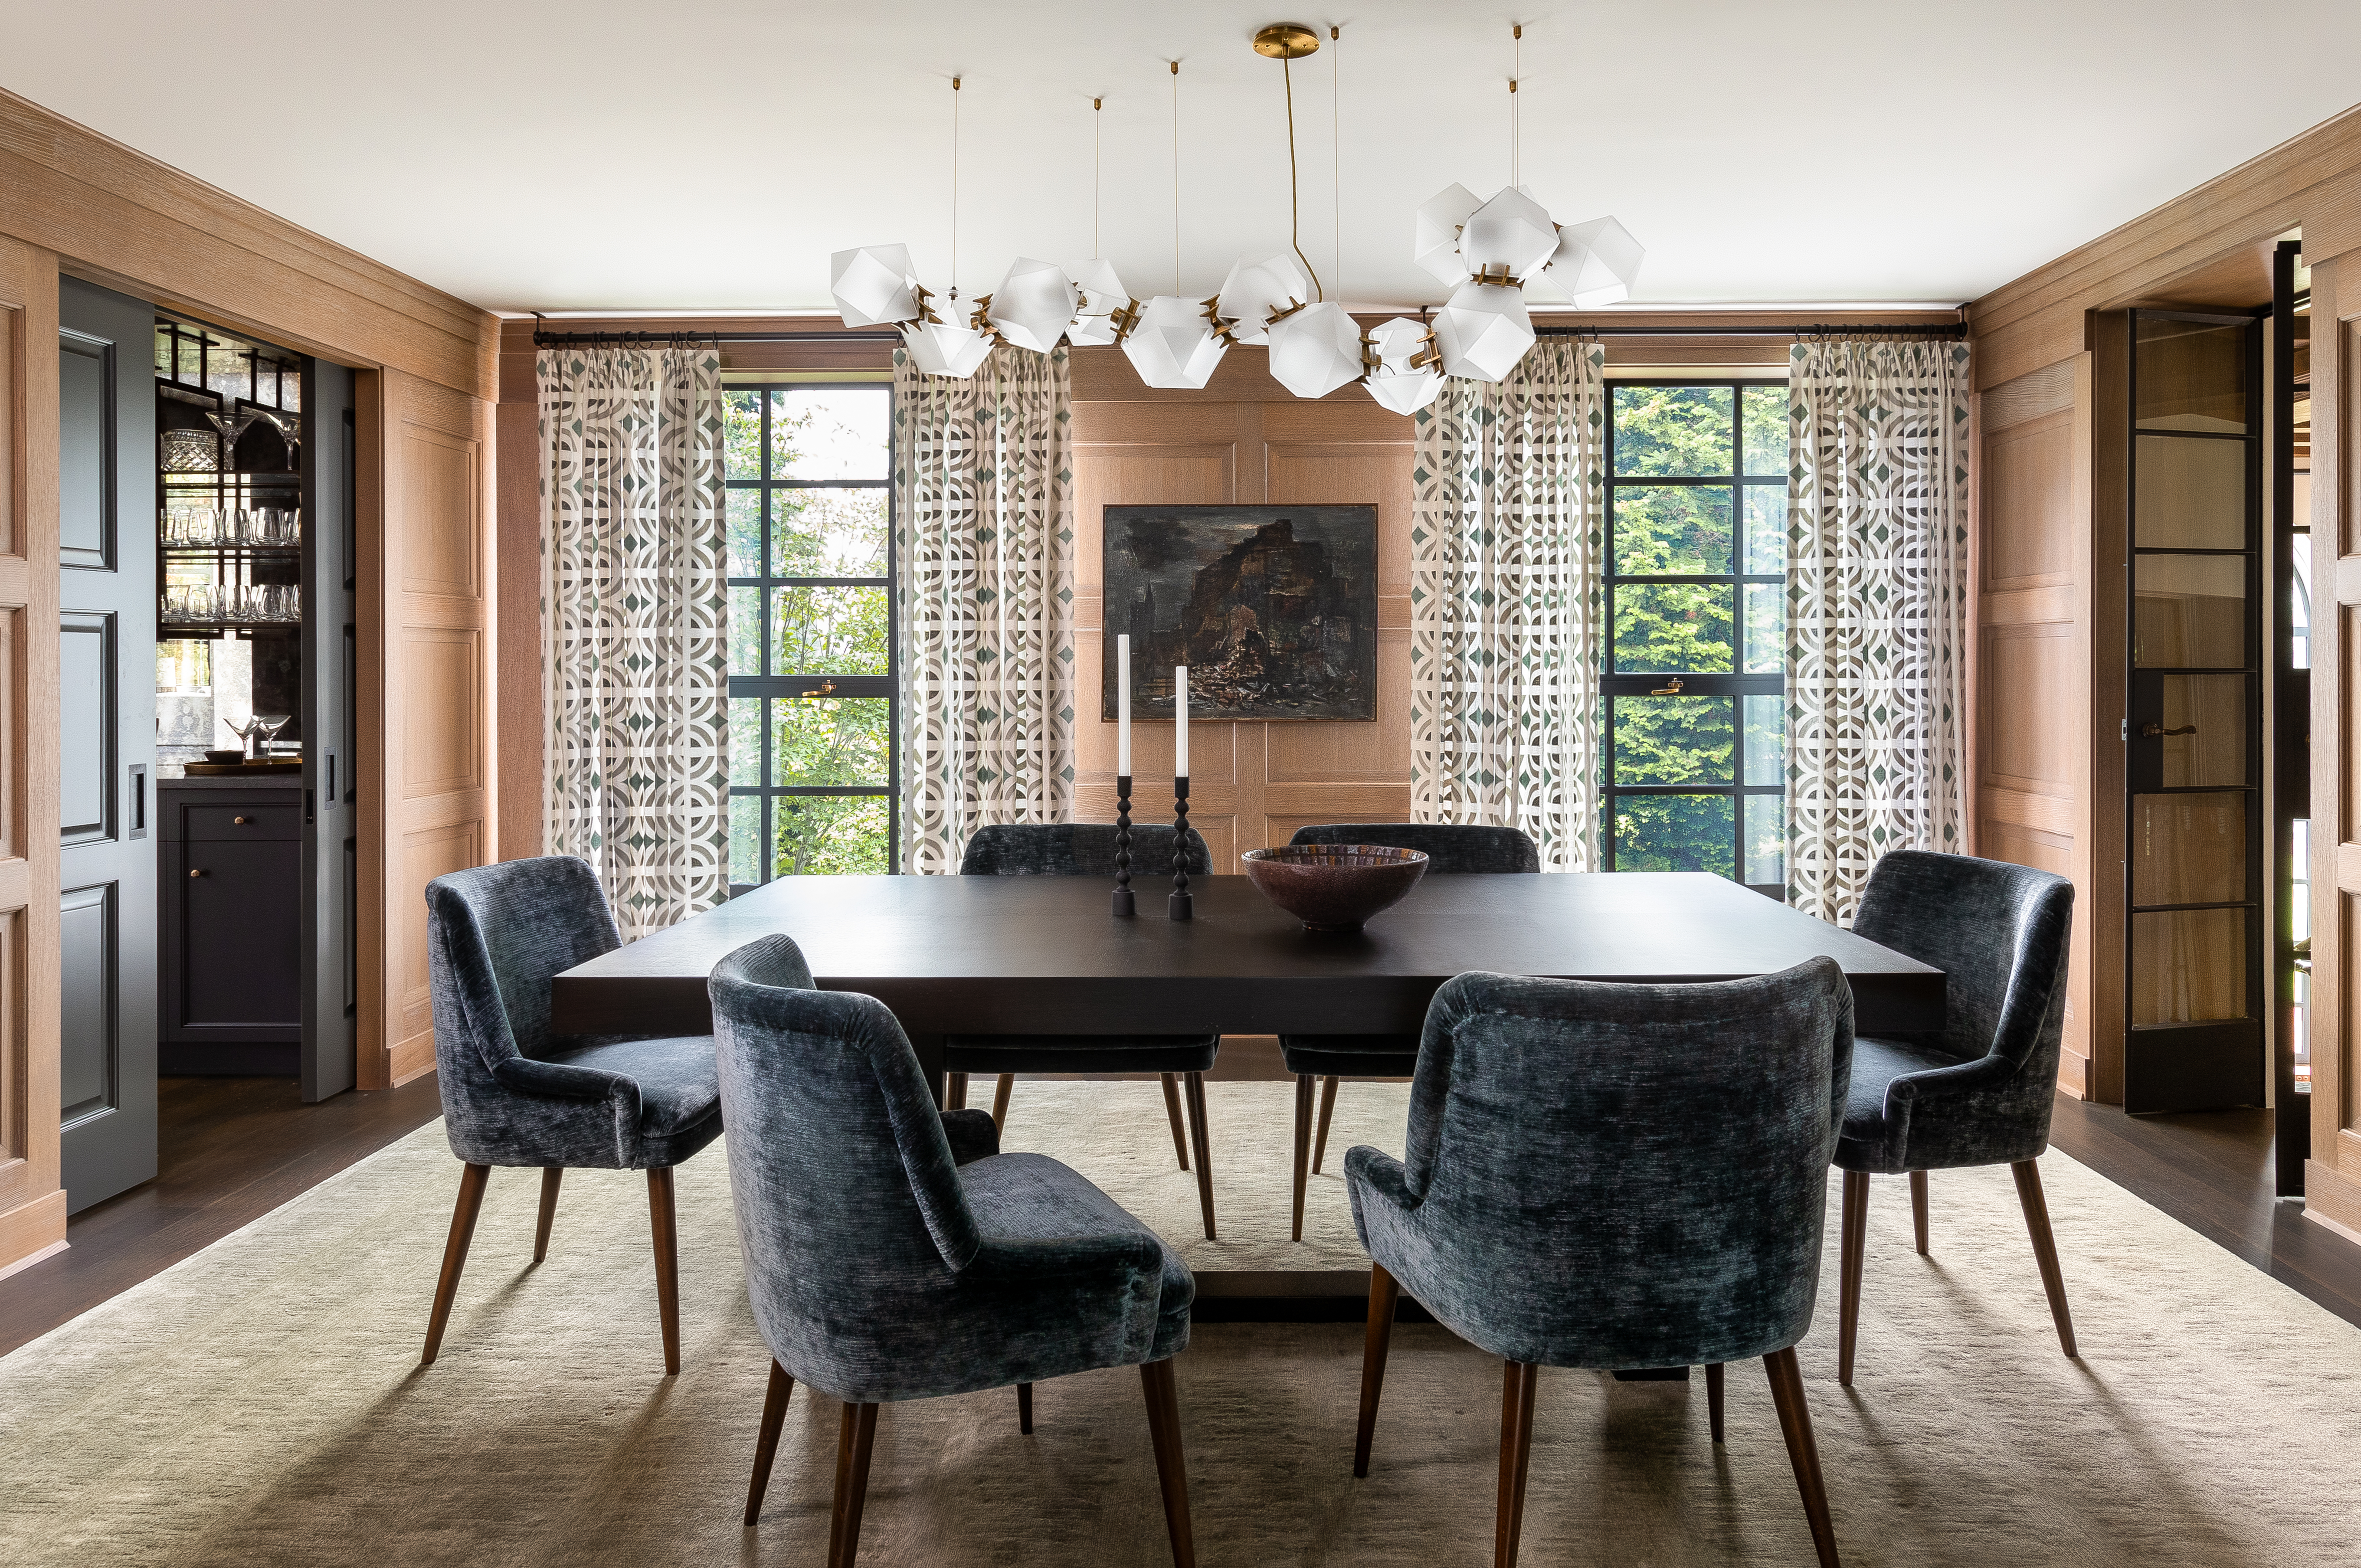 Dining room featuring a Gabriel Scott chandelier, Michael Berman dining table, Fiona McDonald dining chairs with Zoffany fabric, detailed oak wall paneling, and artwork by Charles Freger.